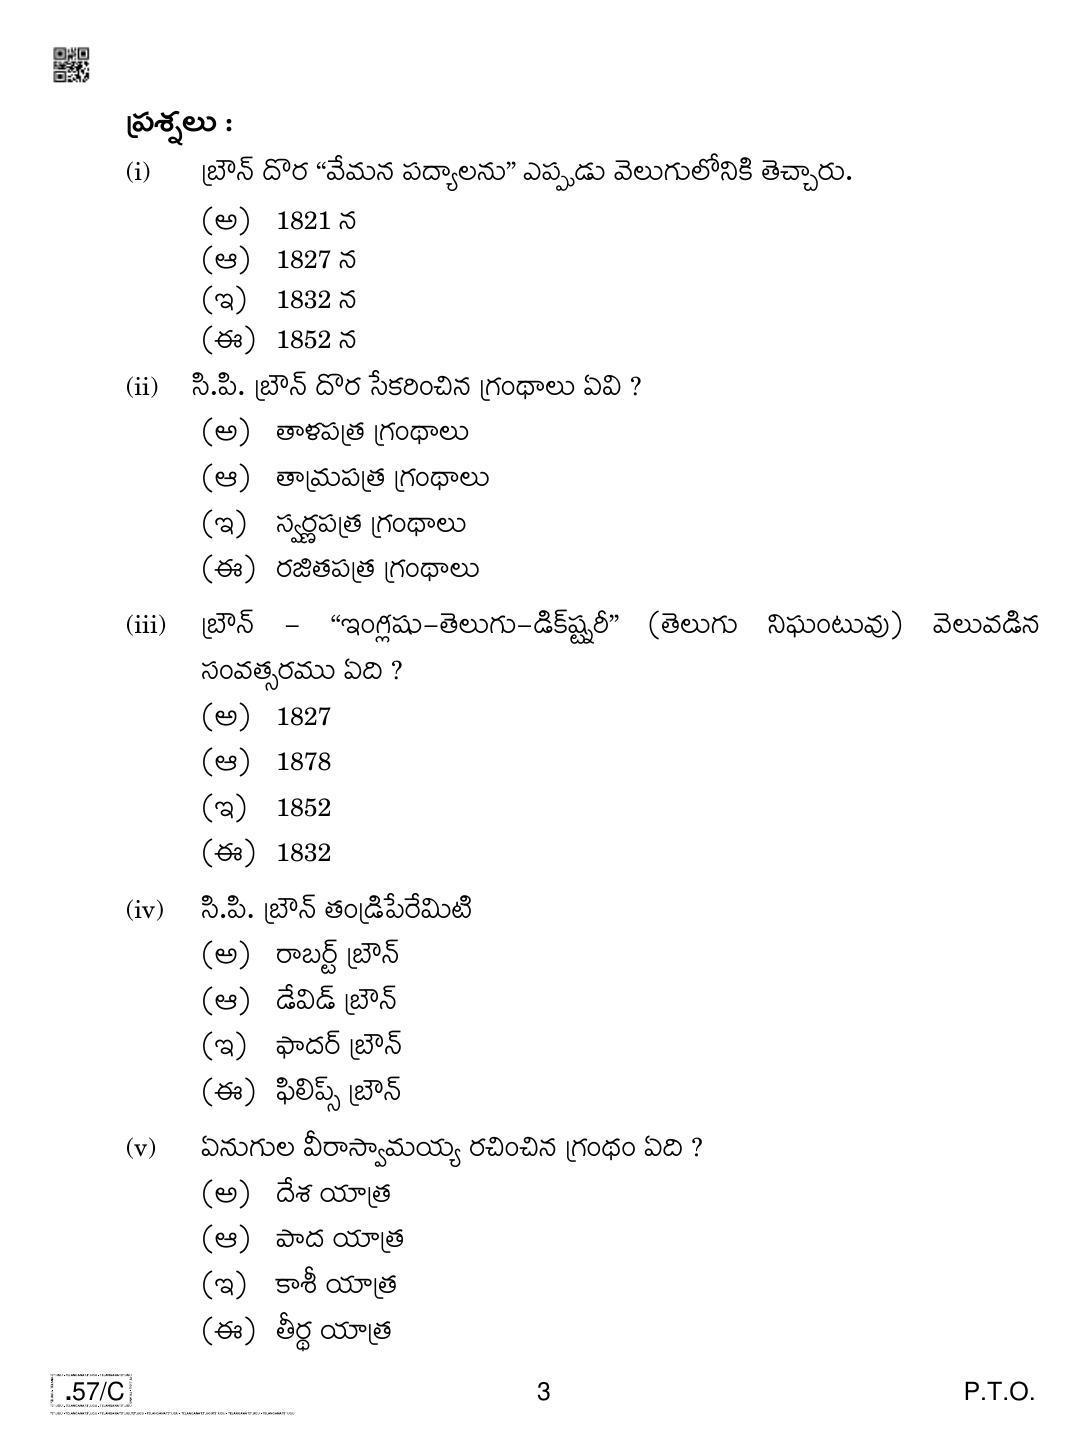 CBSE Class 10 Telug Telangana 2020 Compartment Question Paper - Page 3